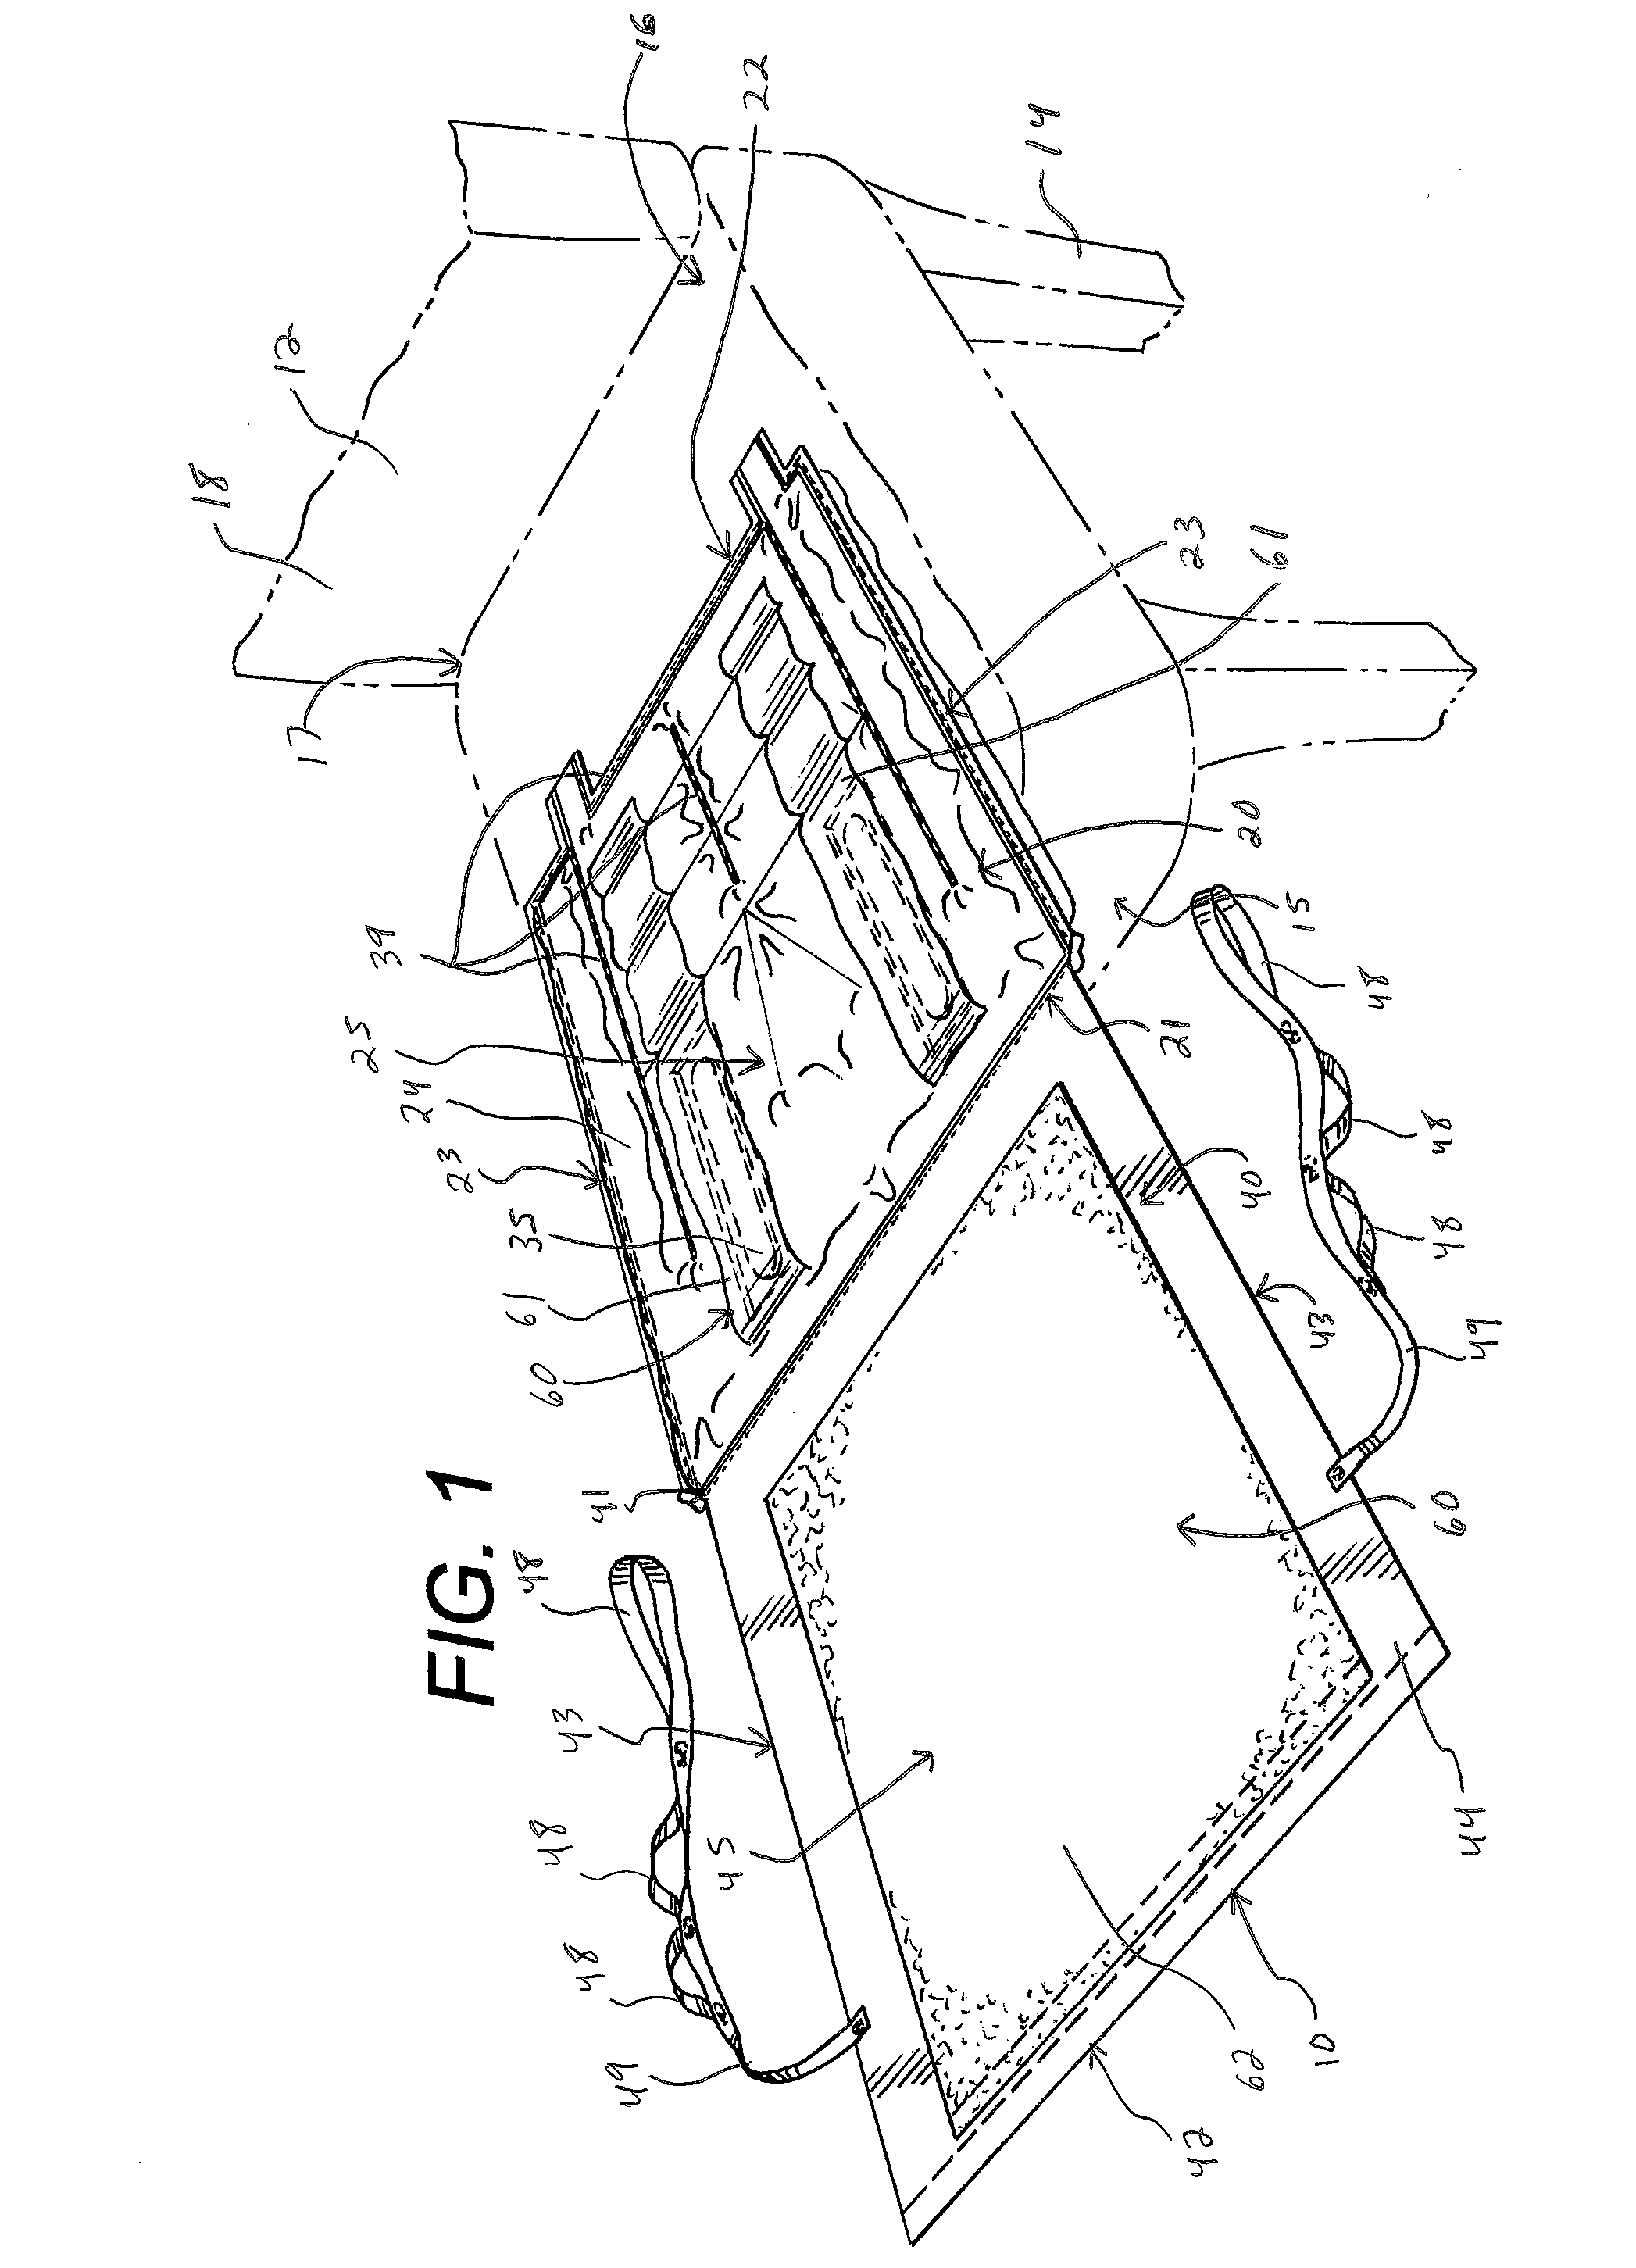 Apparatus and Method for Positioning a Seated Patient